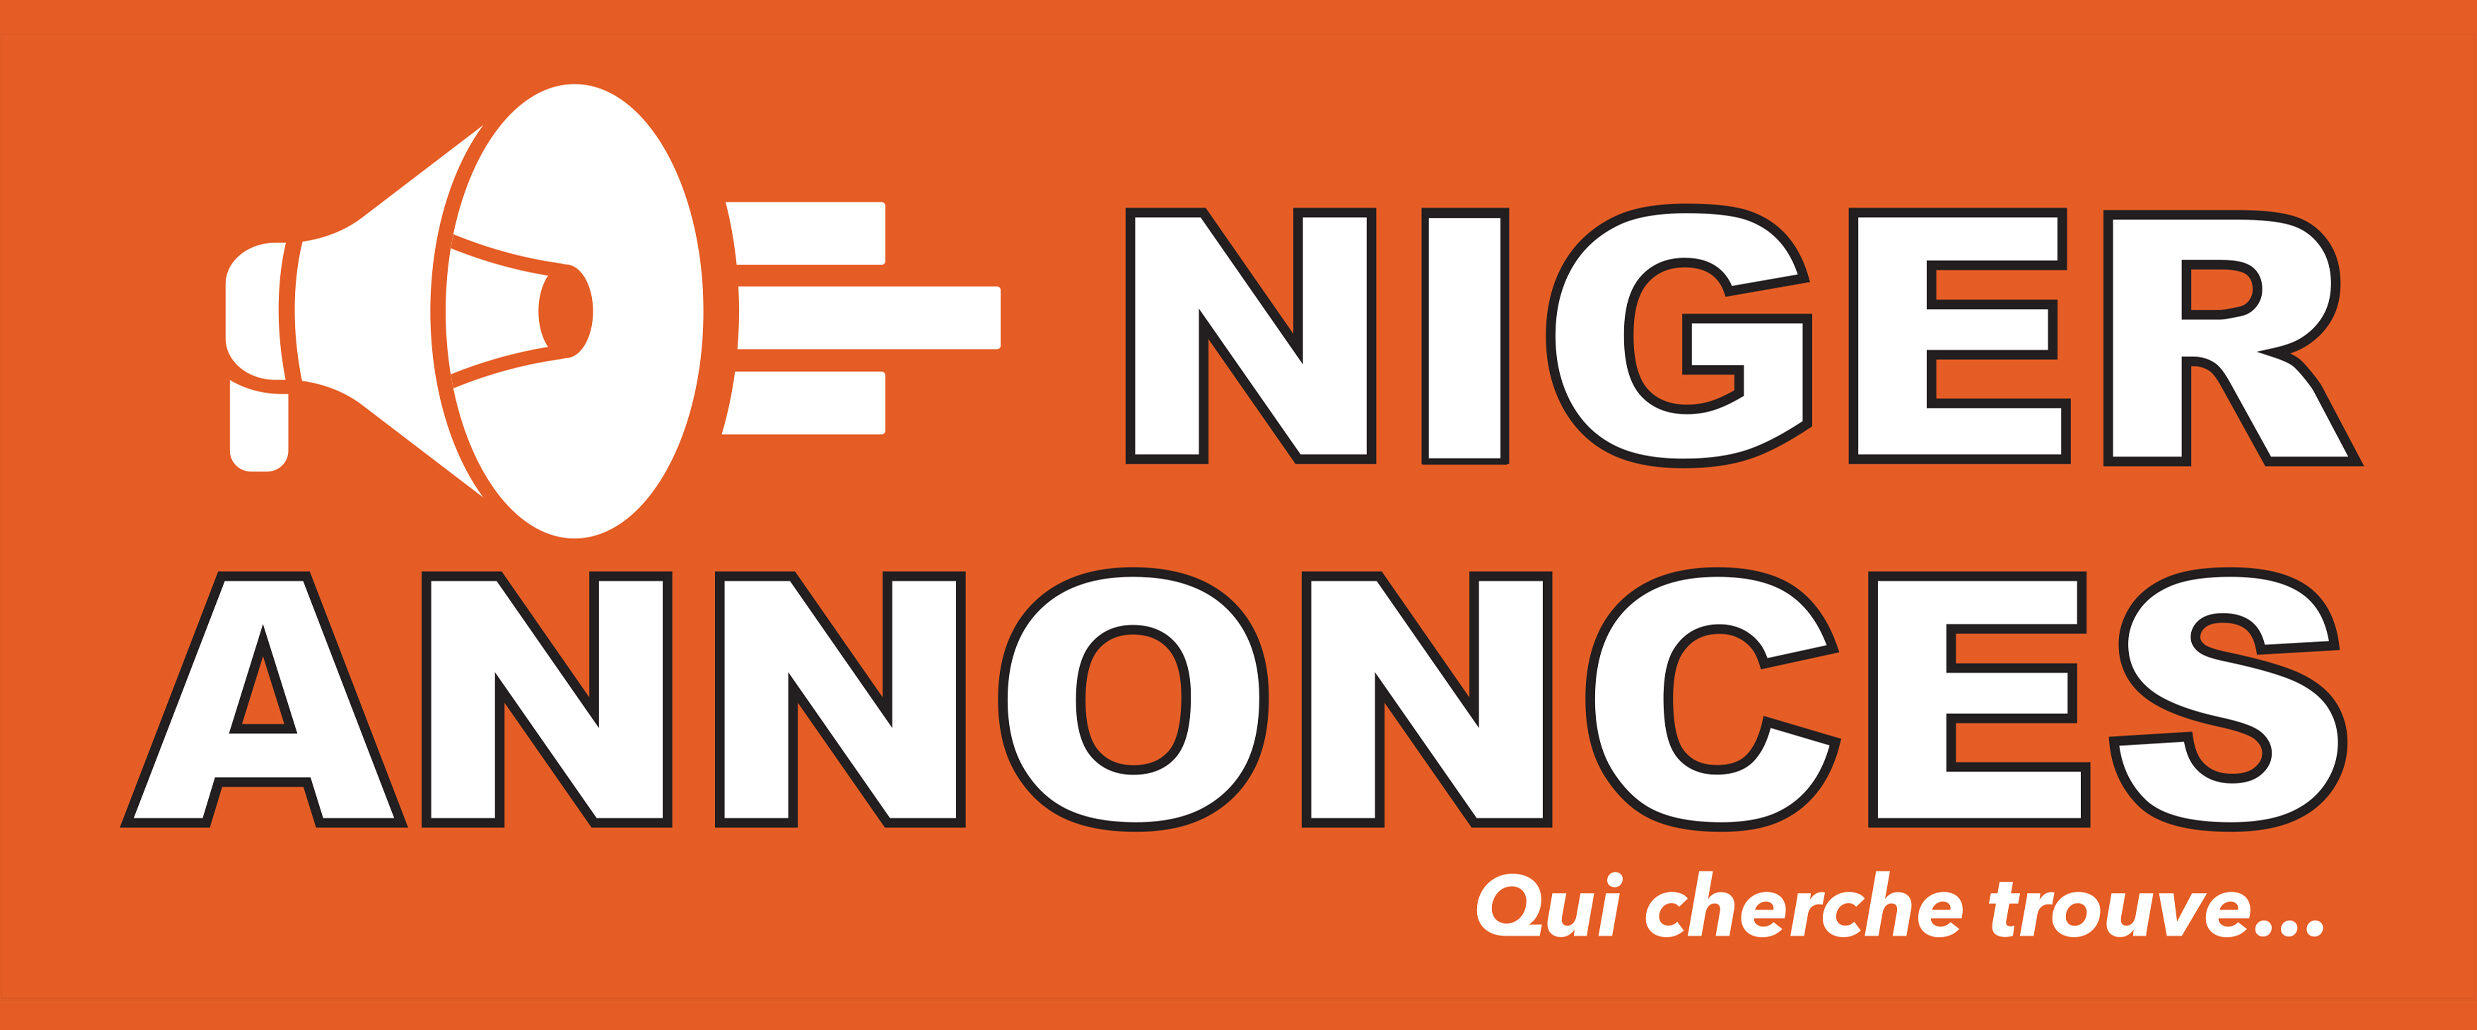 NIGER ANNONCE